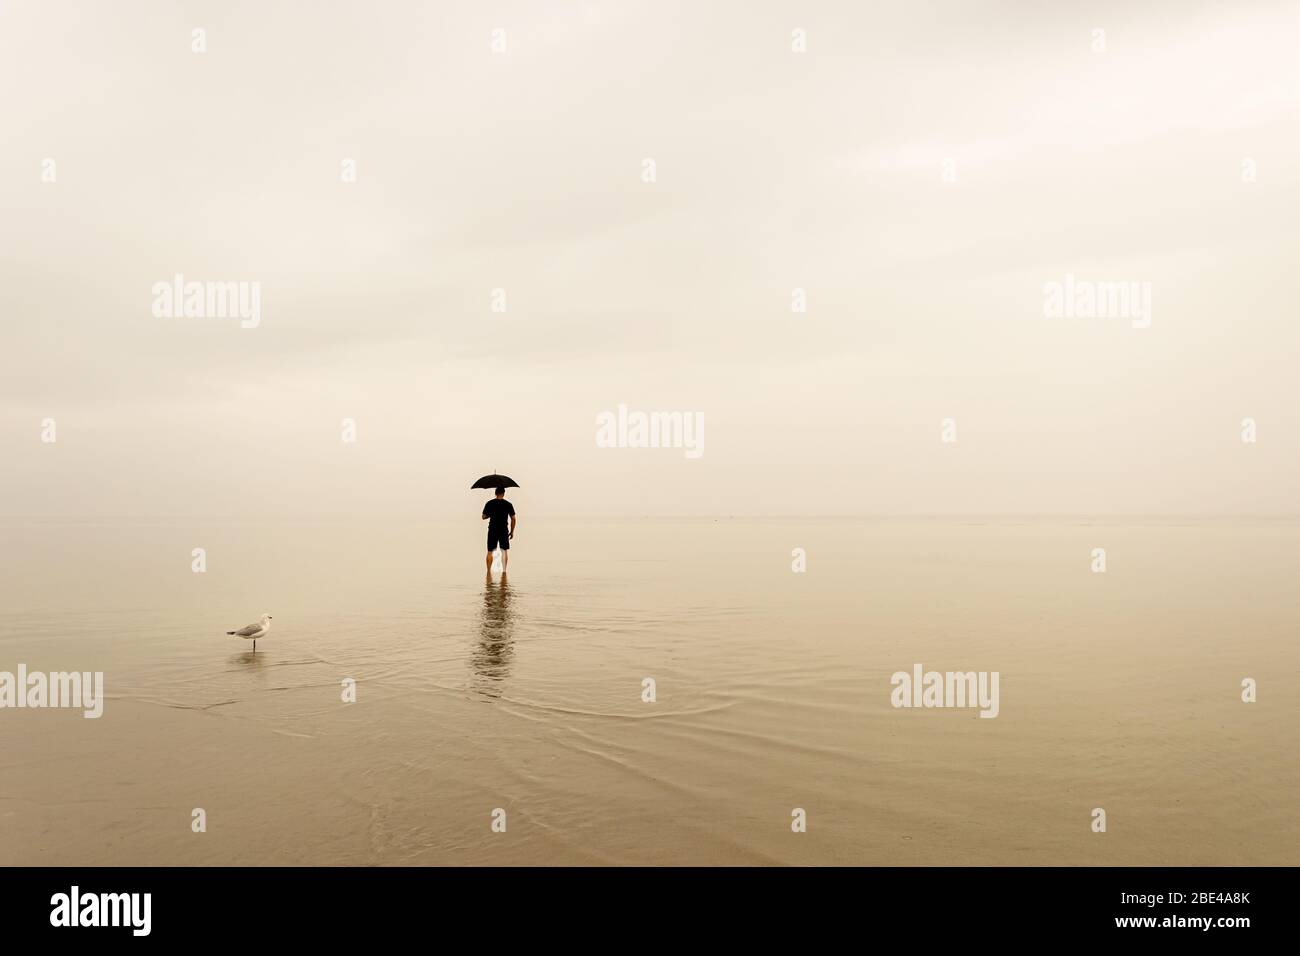 Man standing on a beach with an umbrella in the rain. Copy space for inspiration quote or text Stock Photo